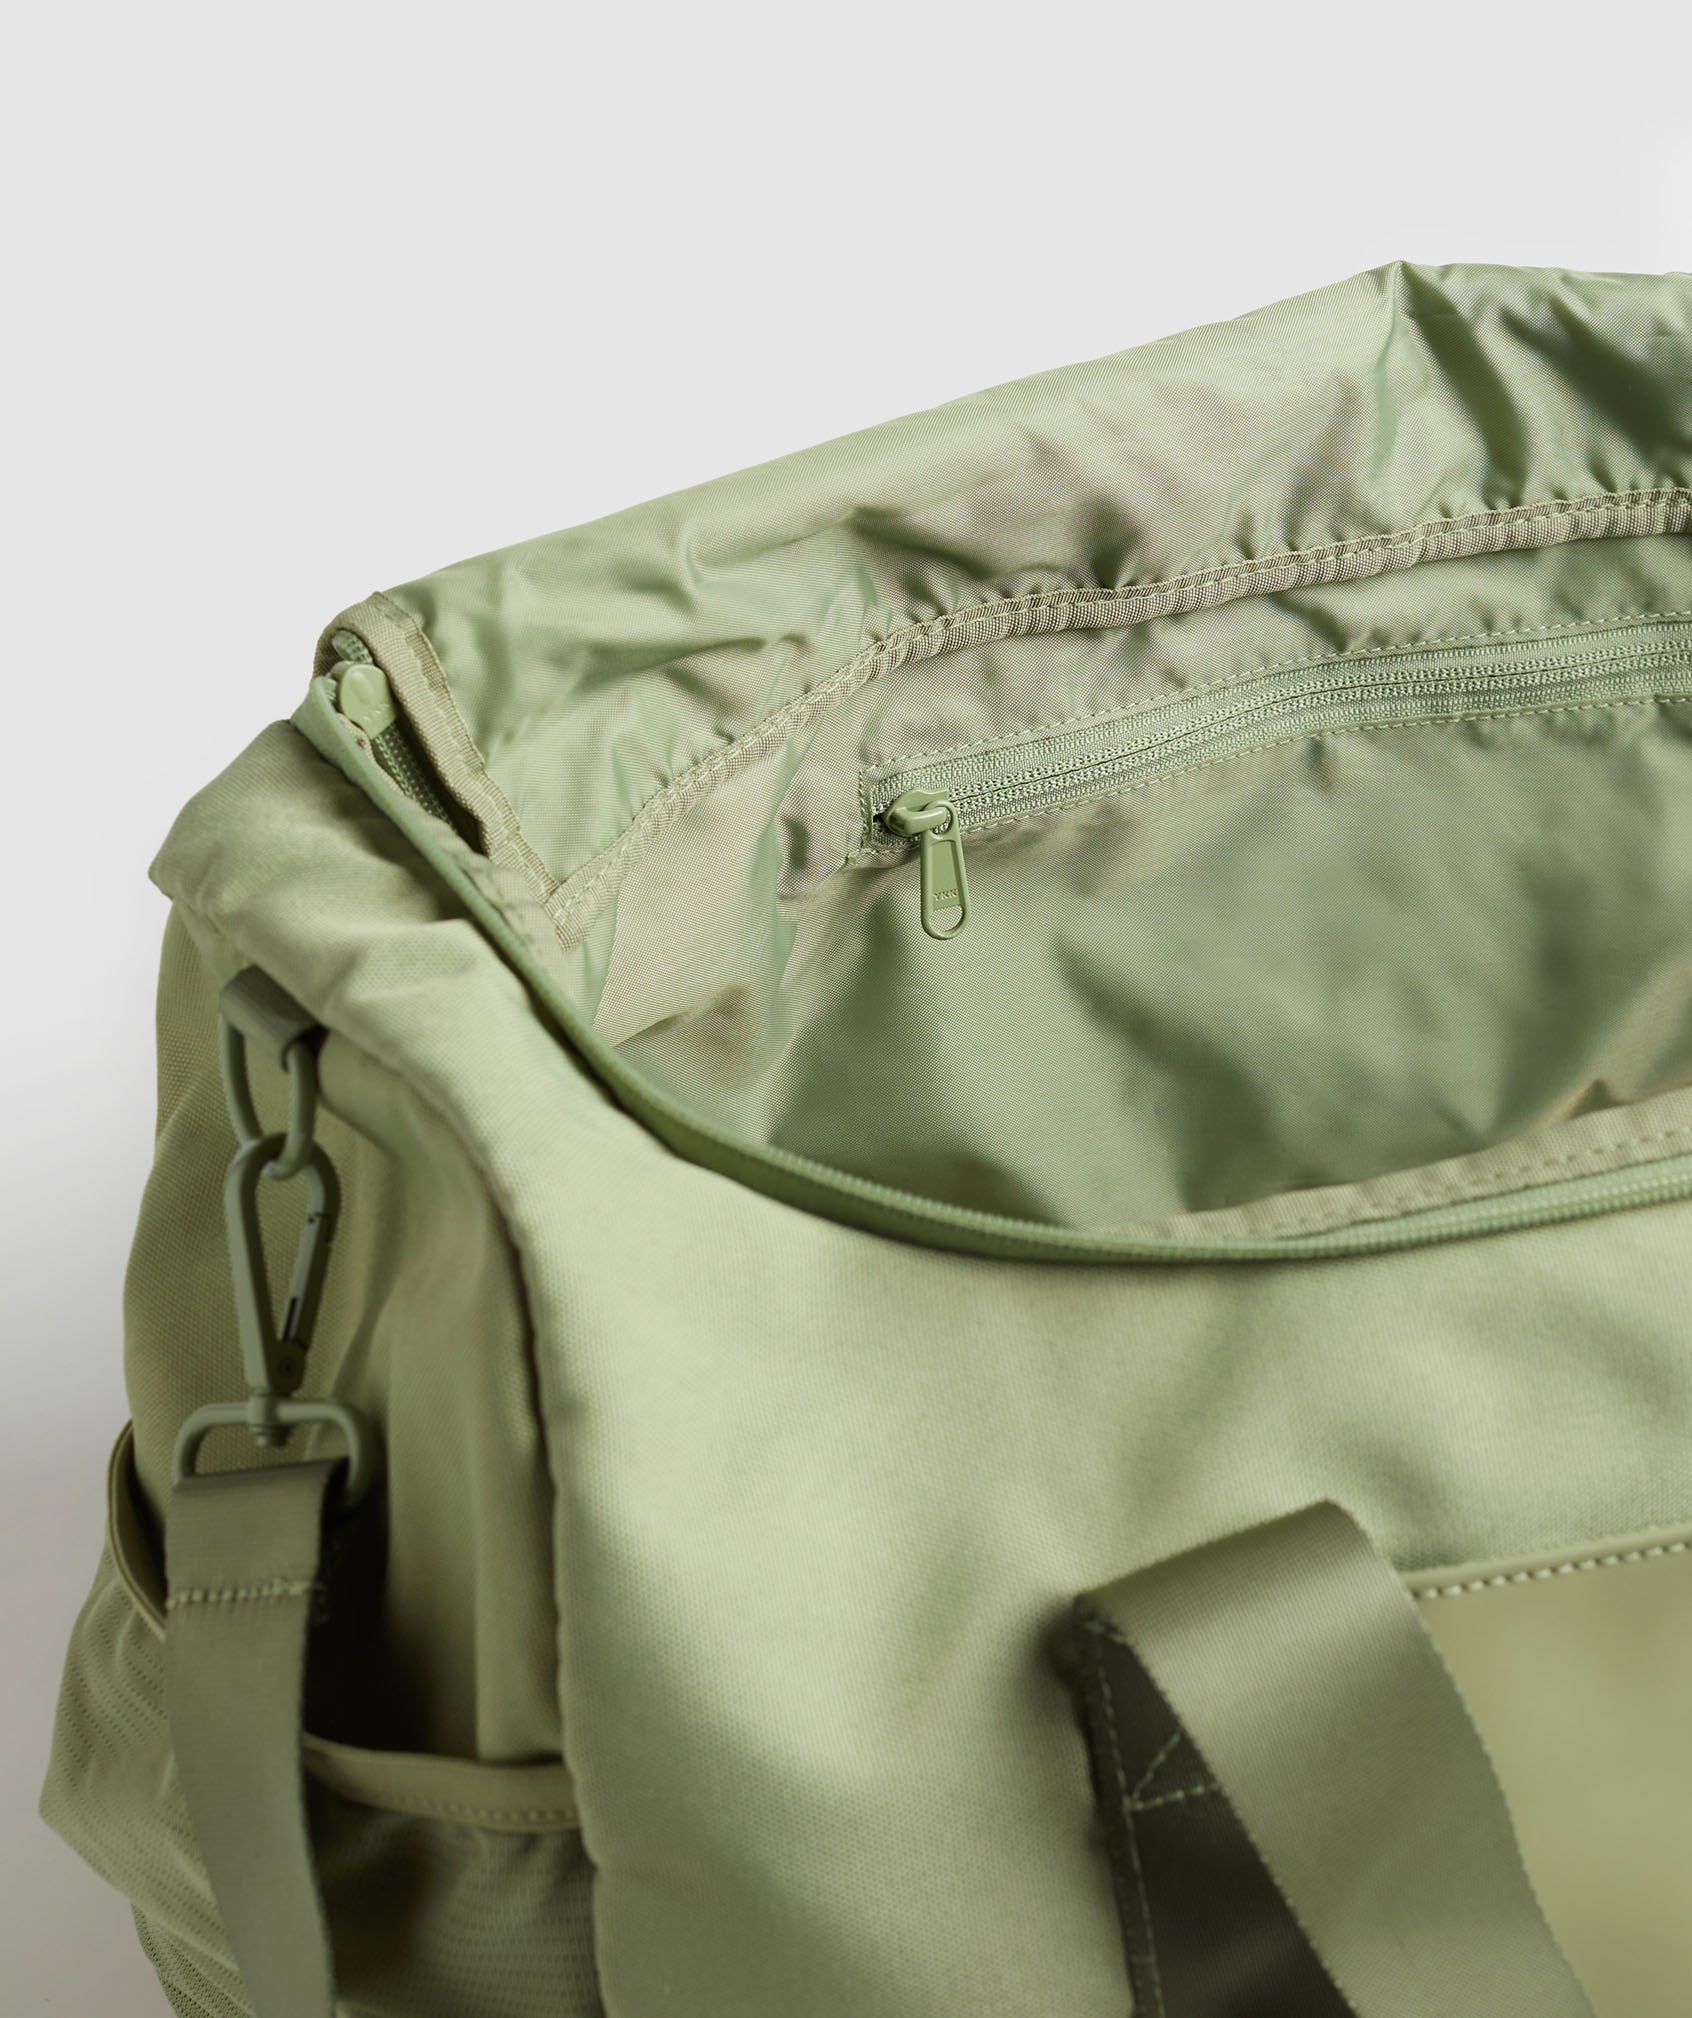 Everyday Holdall Medium in Natural Sage Green - view 4